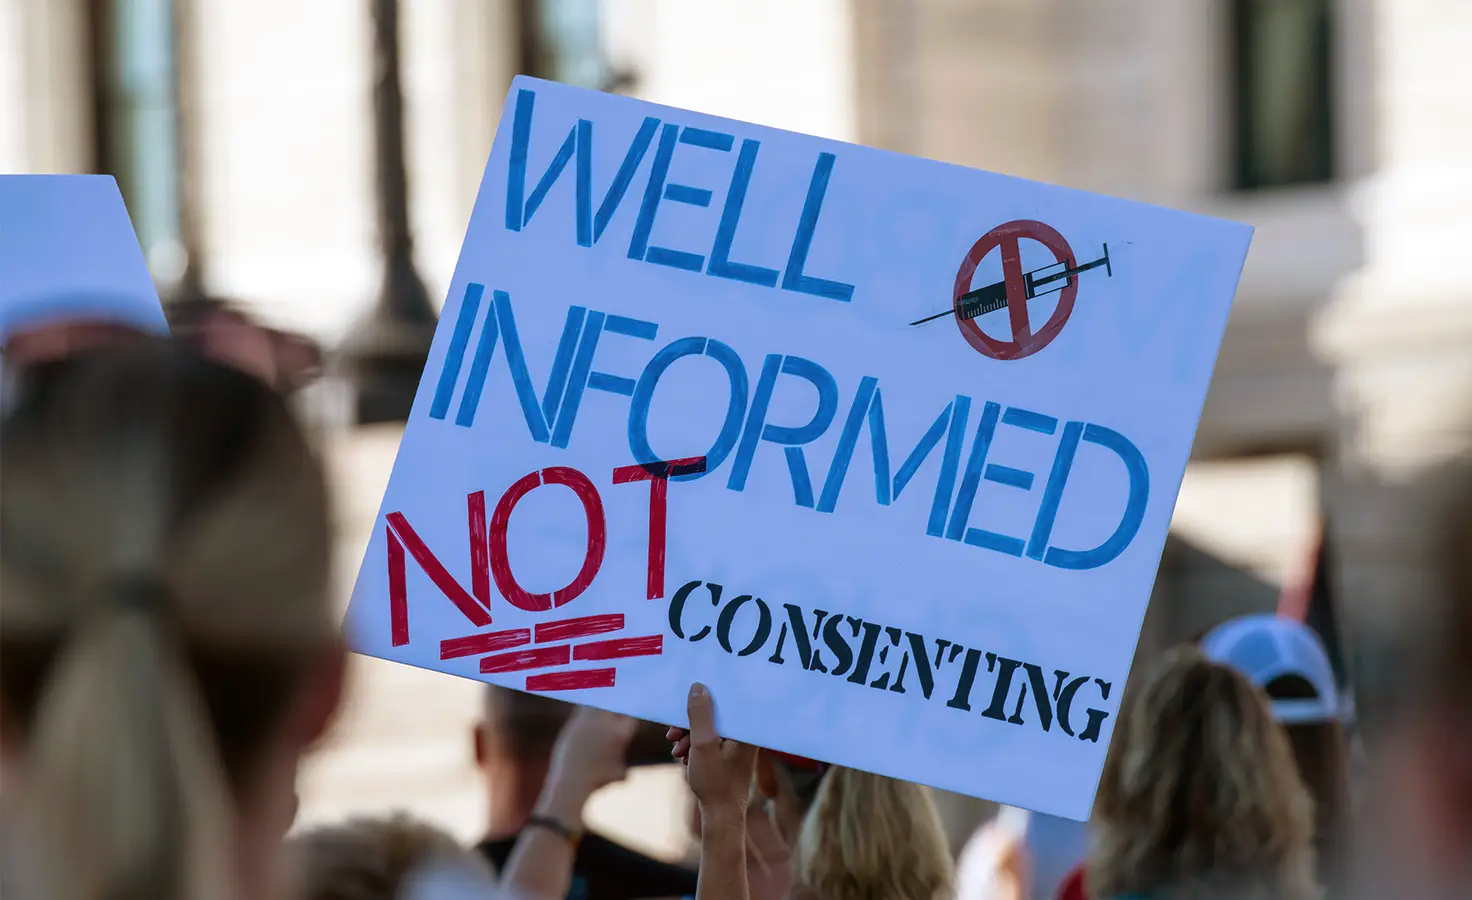 A person holds a sign during a protest that reads WELL INFORMED NOT CONSENTING.